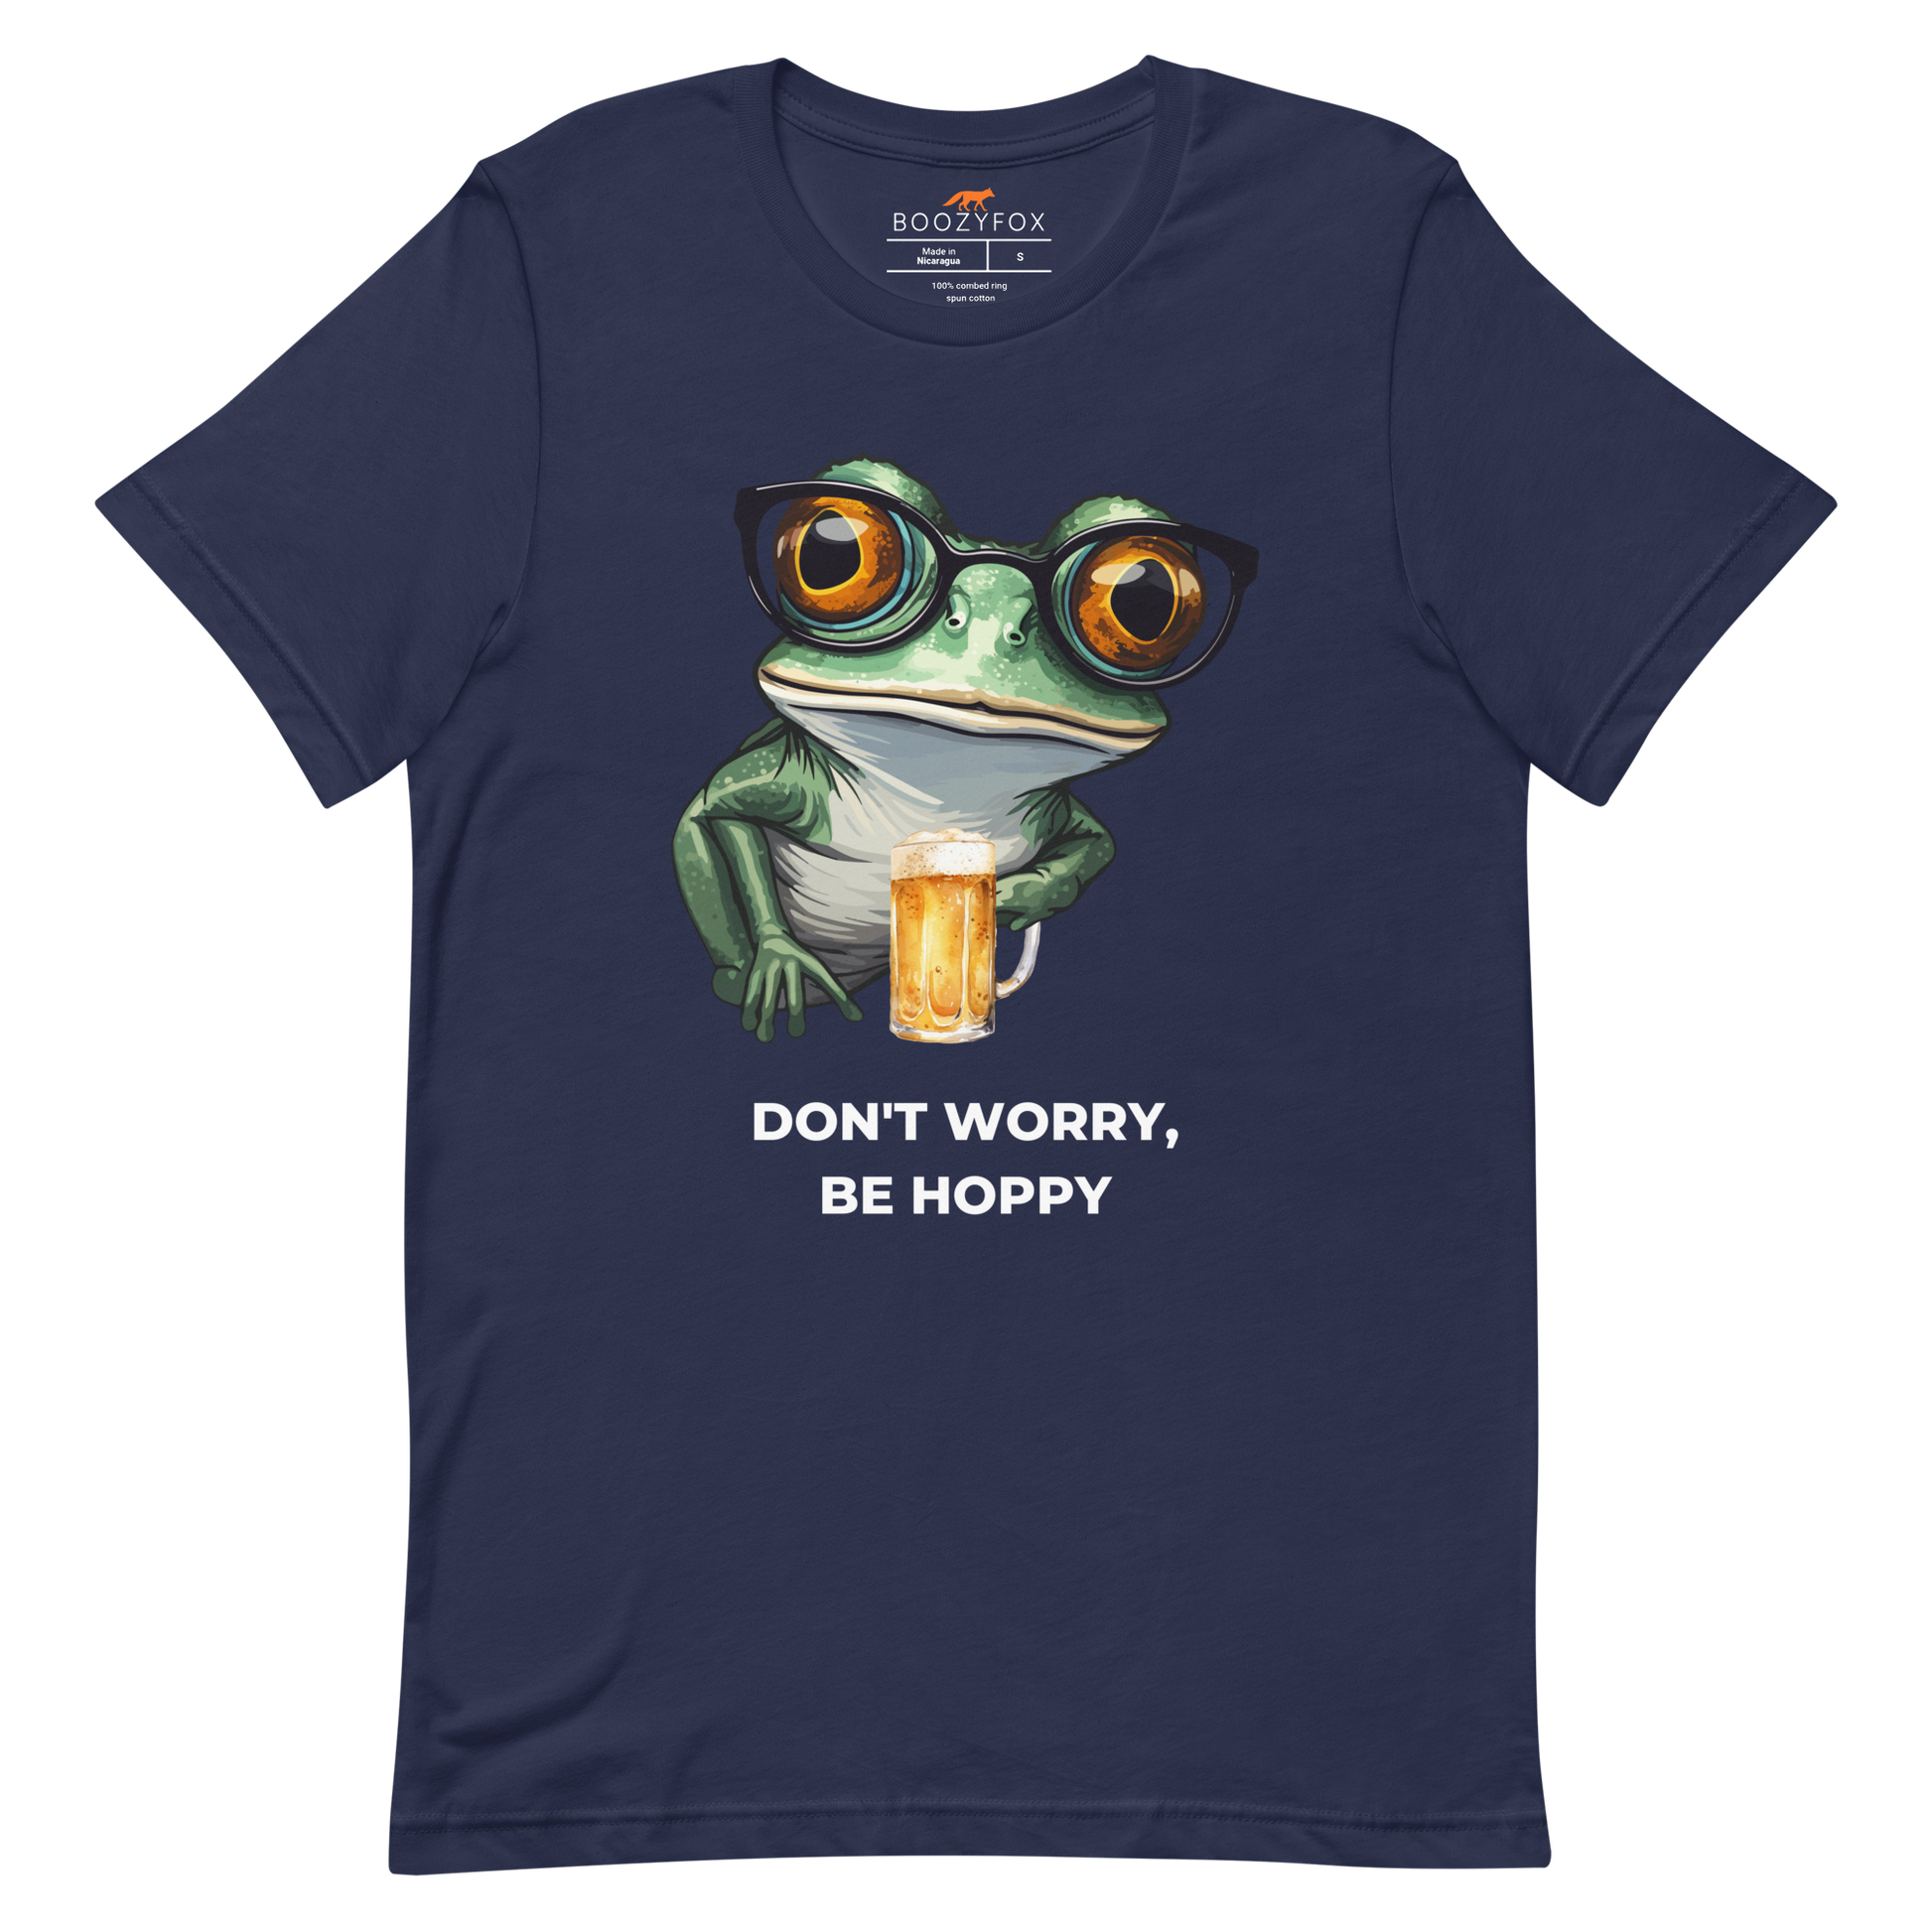 Navy Premium Frog Tee featuring a funny Don't Worry, Be Hoppy graphic on the chest - Funny Graphic Frog Tees - Boozy Fox